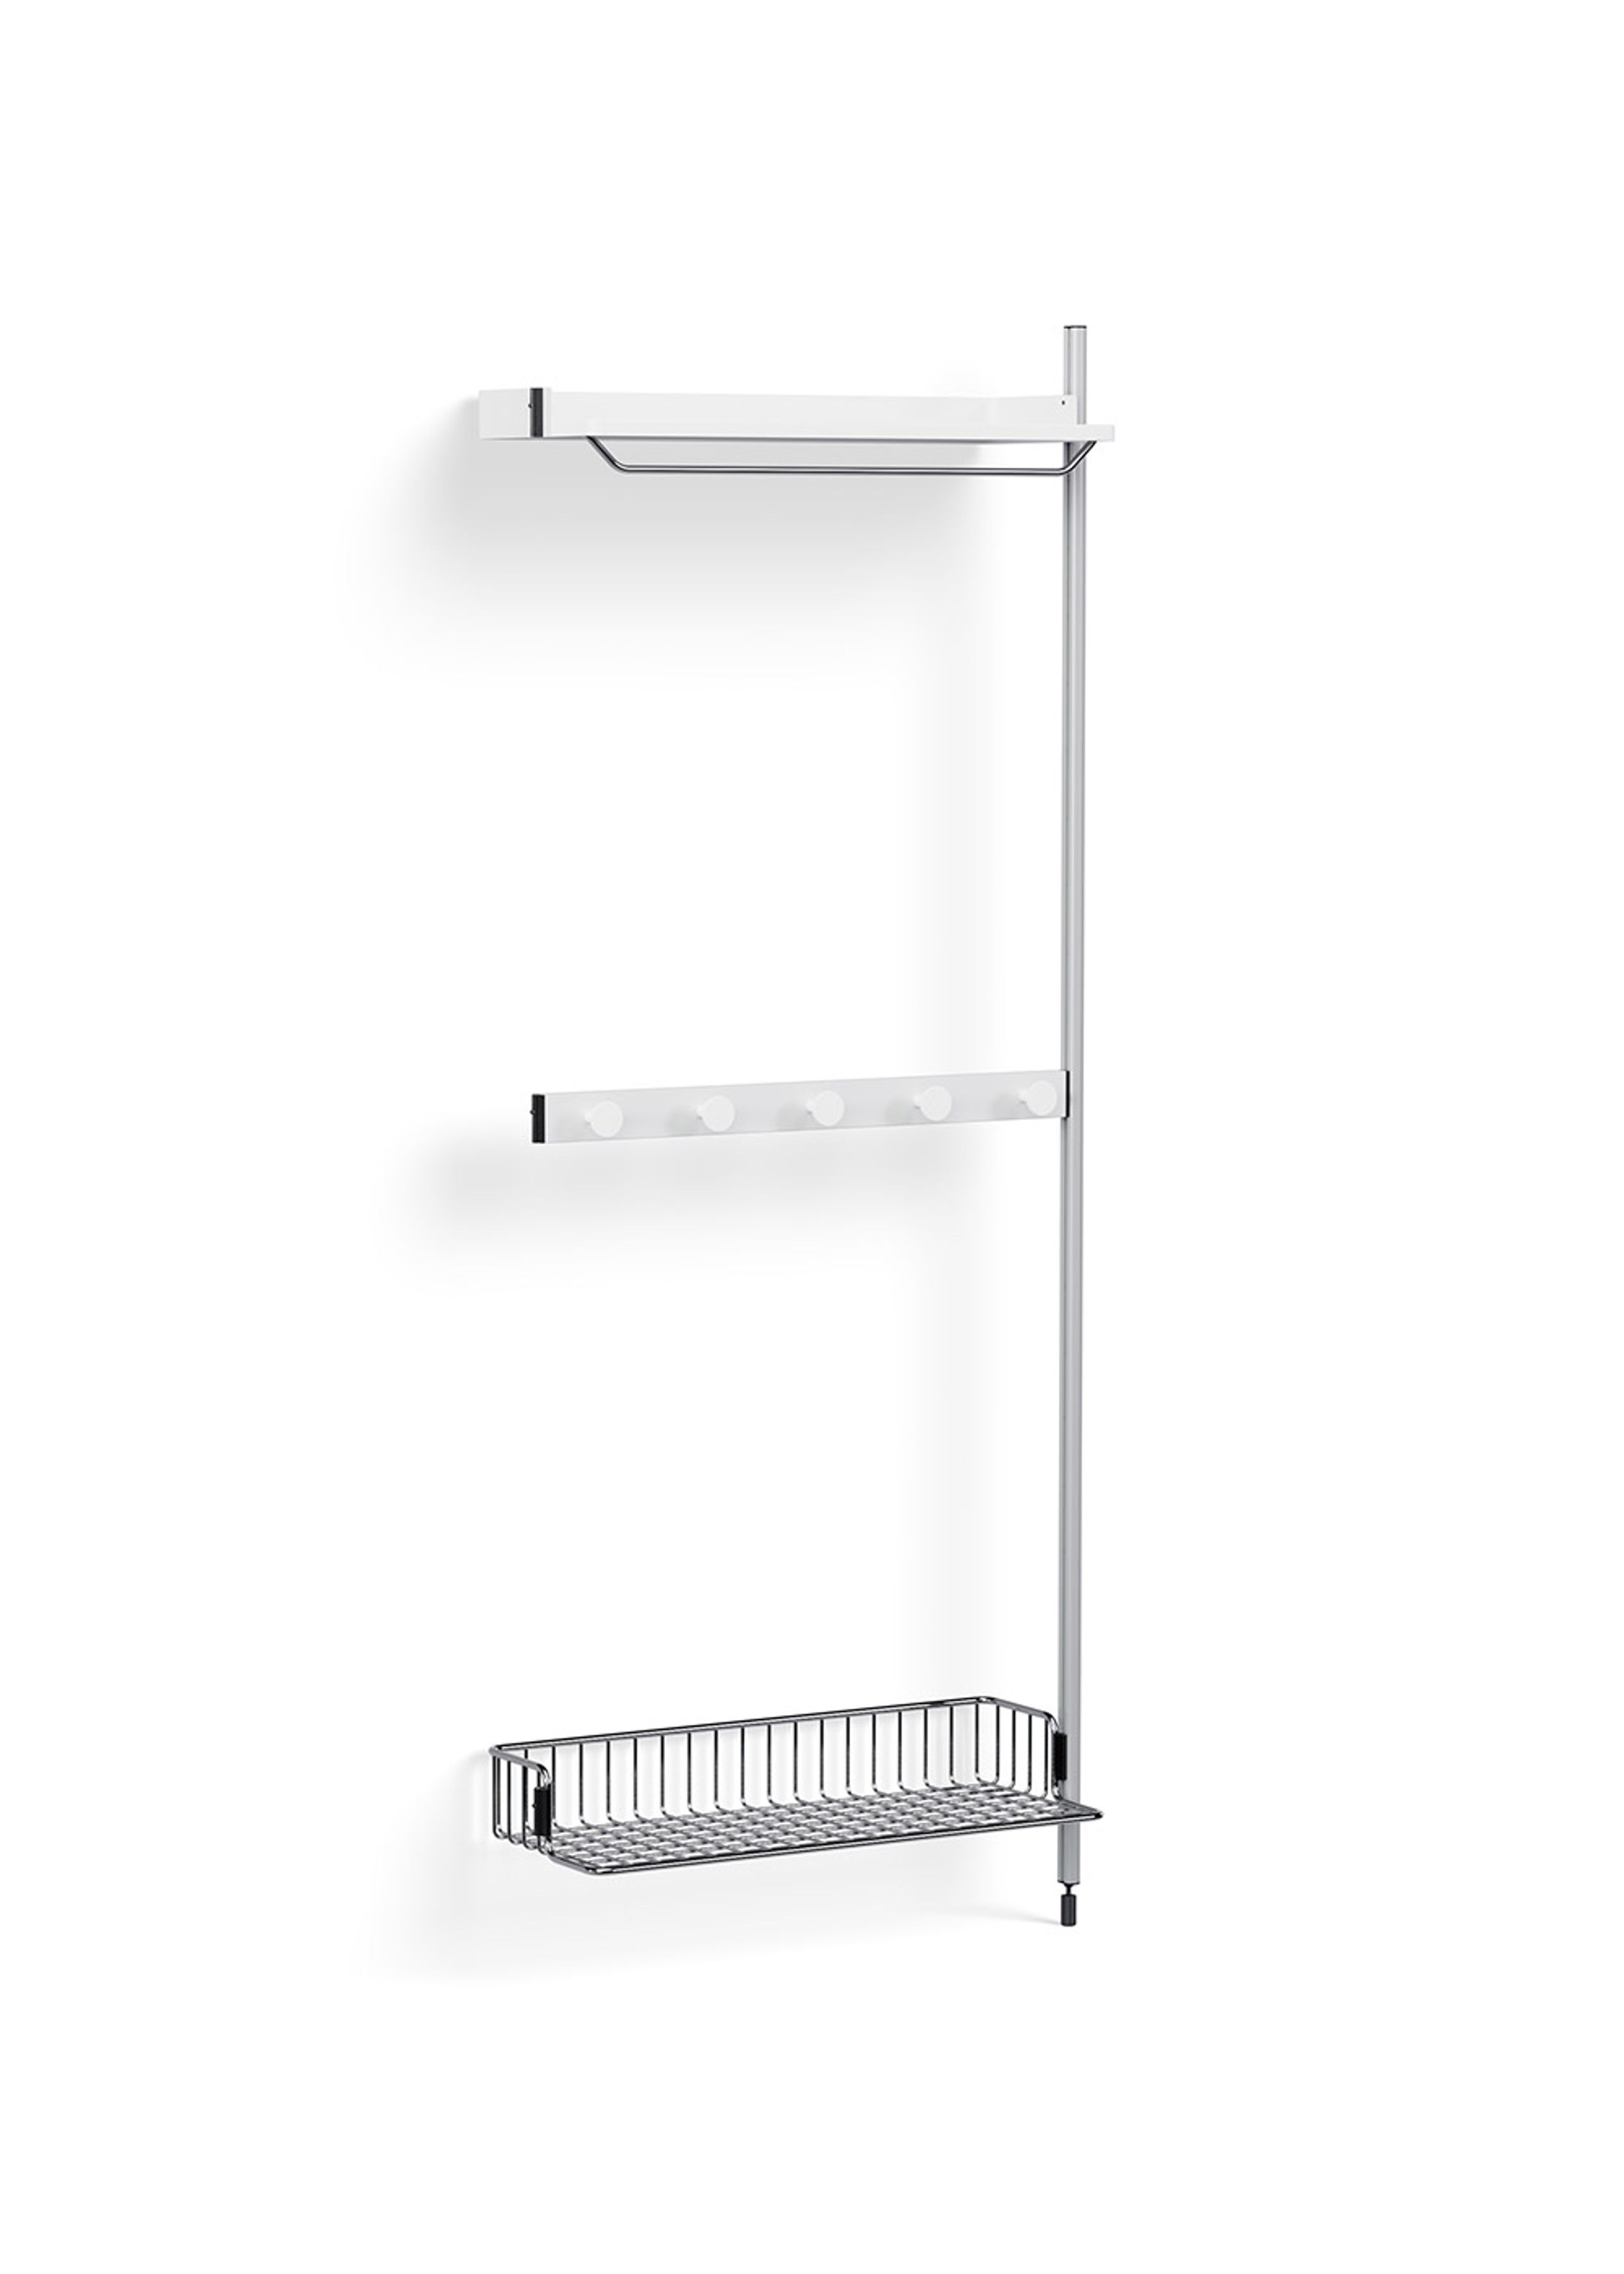 HAY - Reol - Pier System / No. 1040 - White / Clear Anodised Aluminium